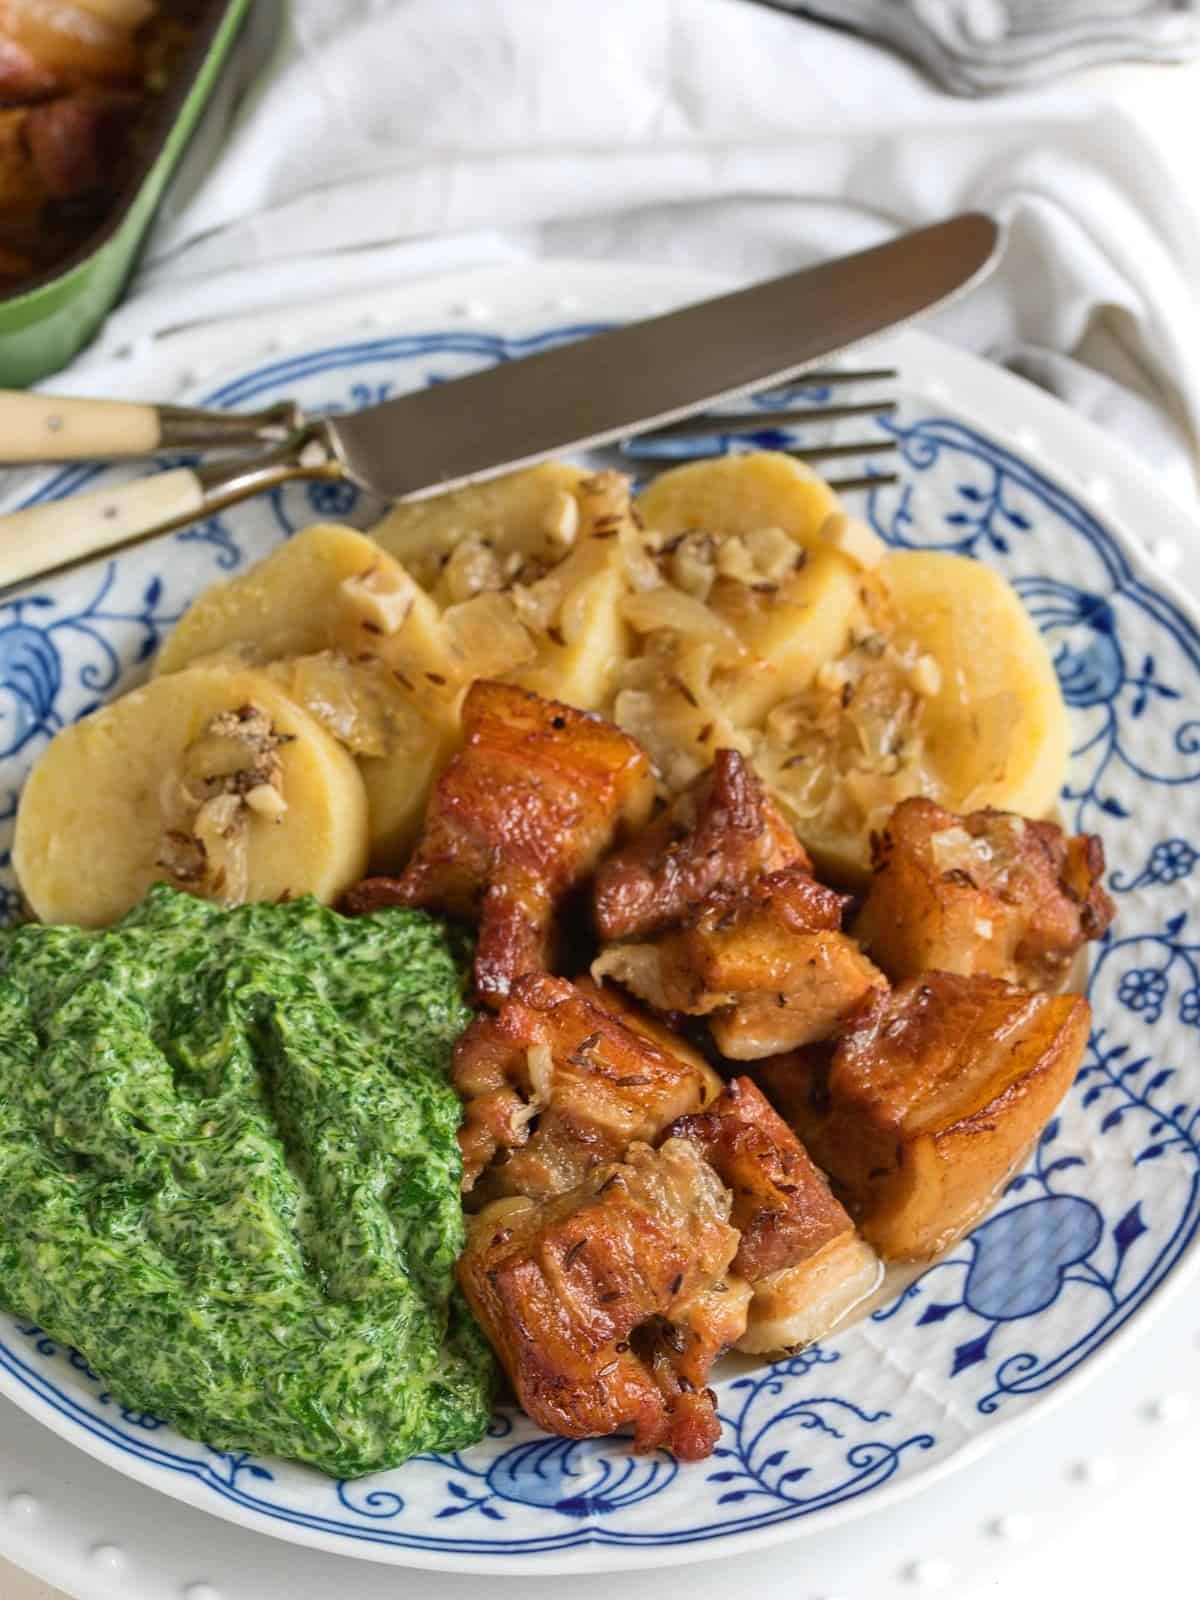 Pork belly bites served with creamed spinach and potato dumplings.